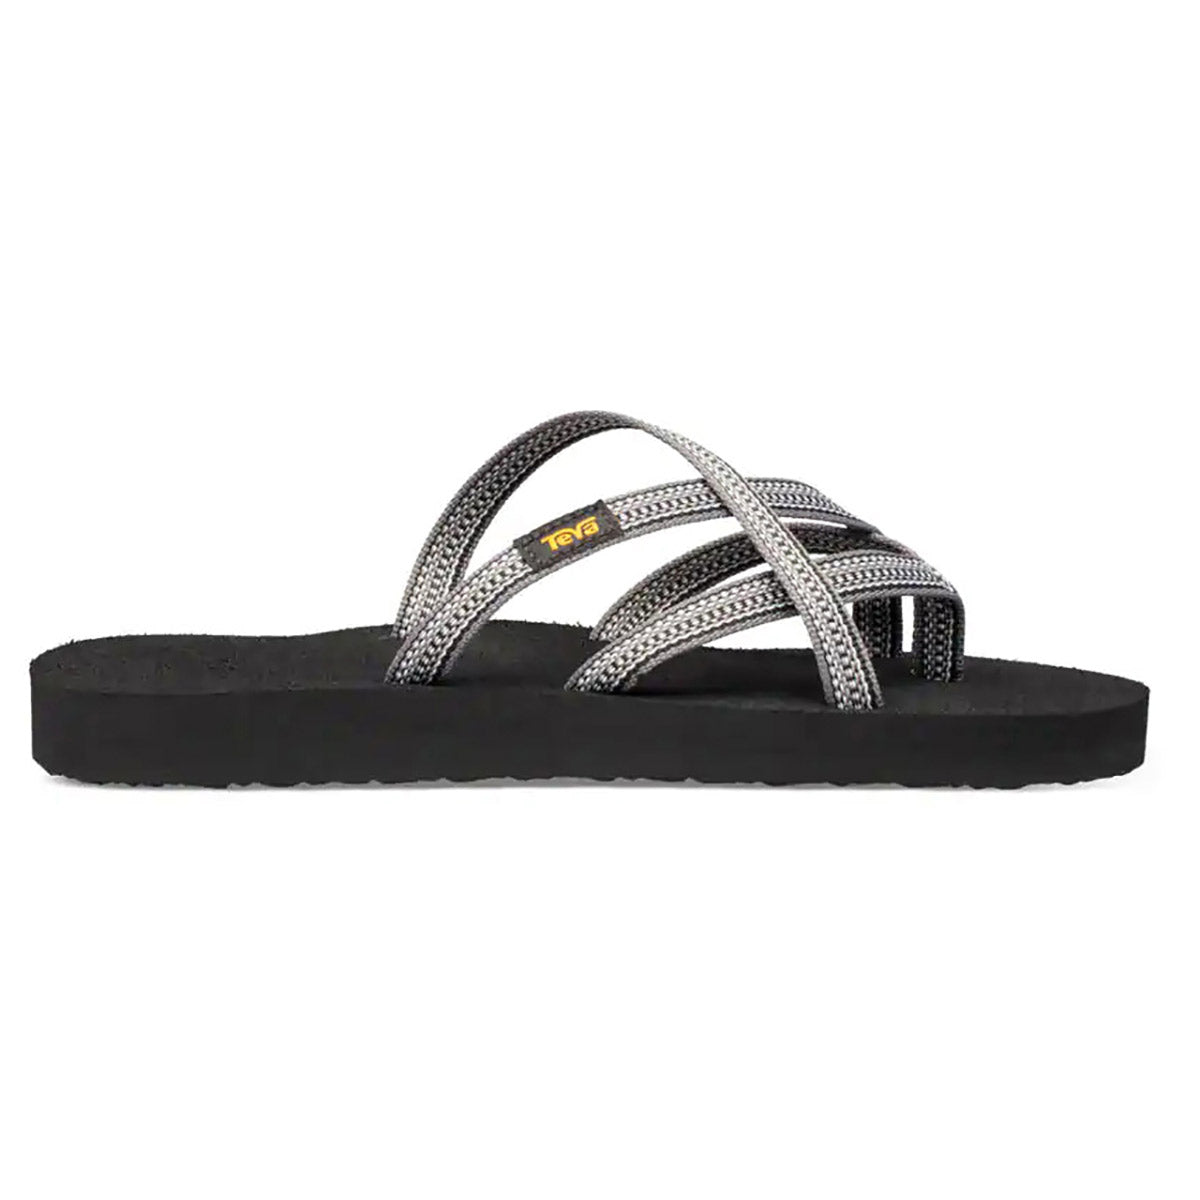 A women&#39;s TEVA OLOWAHU ANTIGUOUS GREY - WOMENS flip-flop sandal with crisscrossing metallic, recycled quick-drying polyester straps.